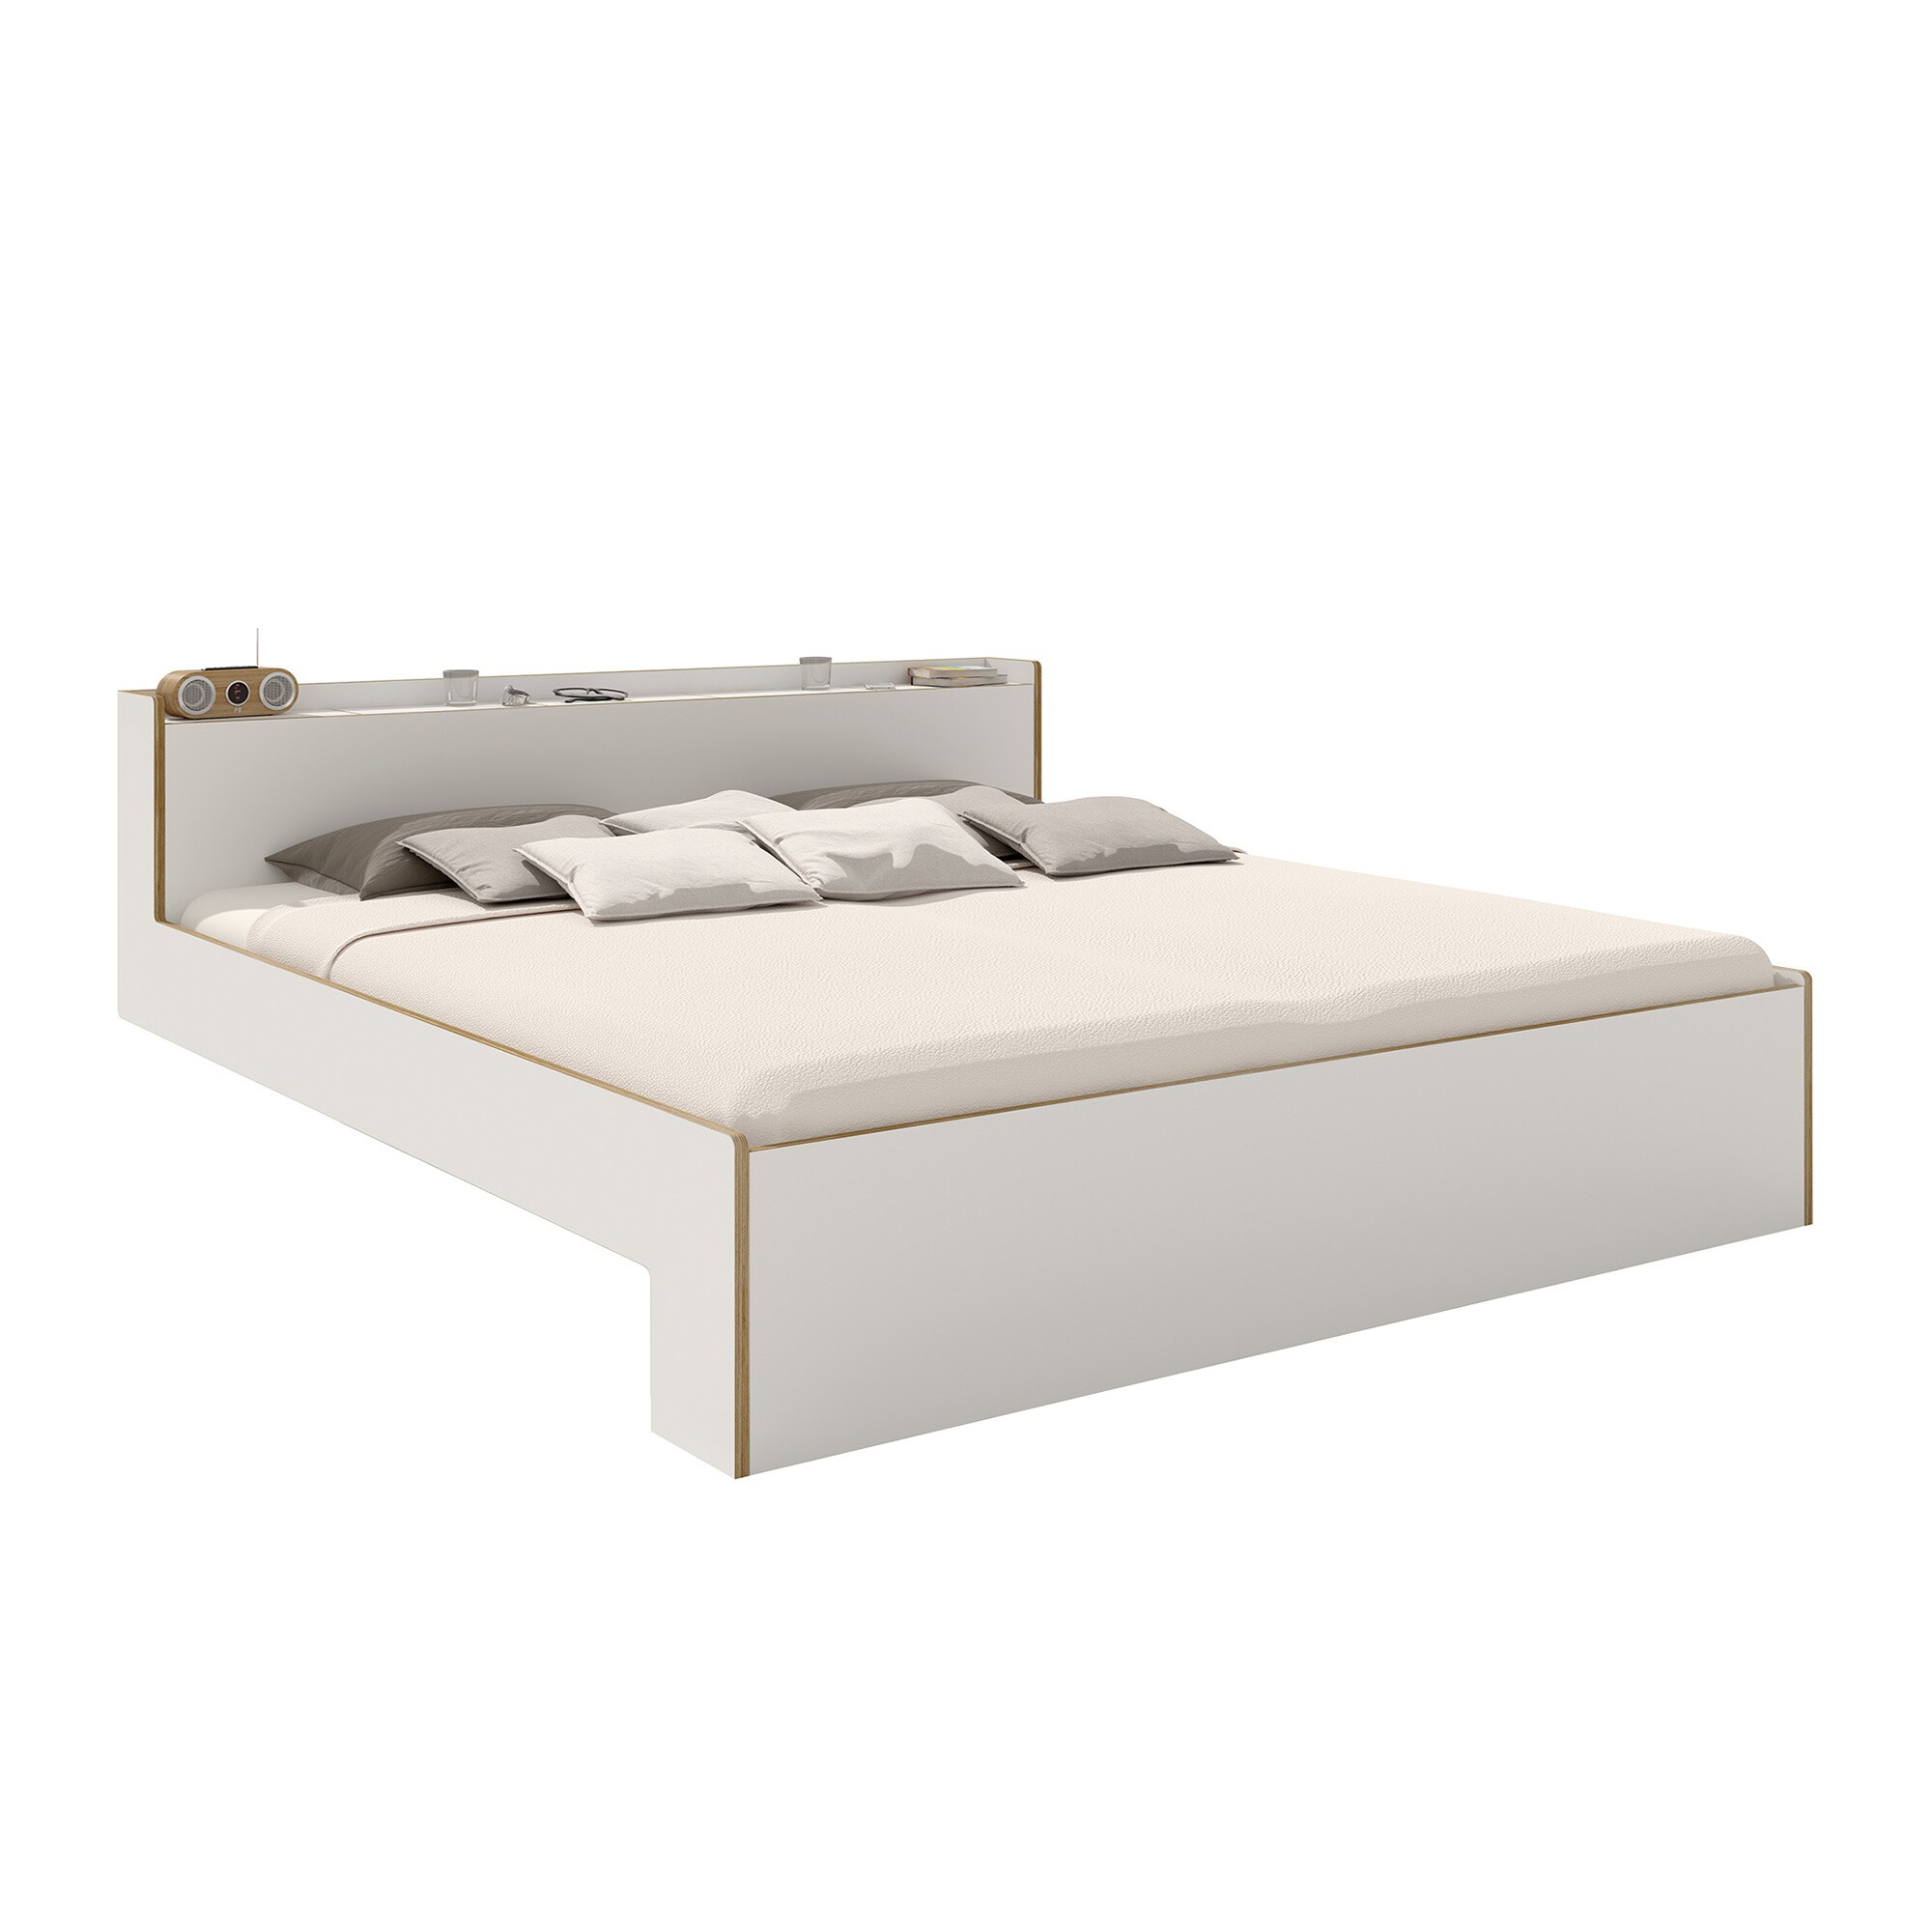 Müller Small Living Nook Double Bed, Nook Twin Bed